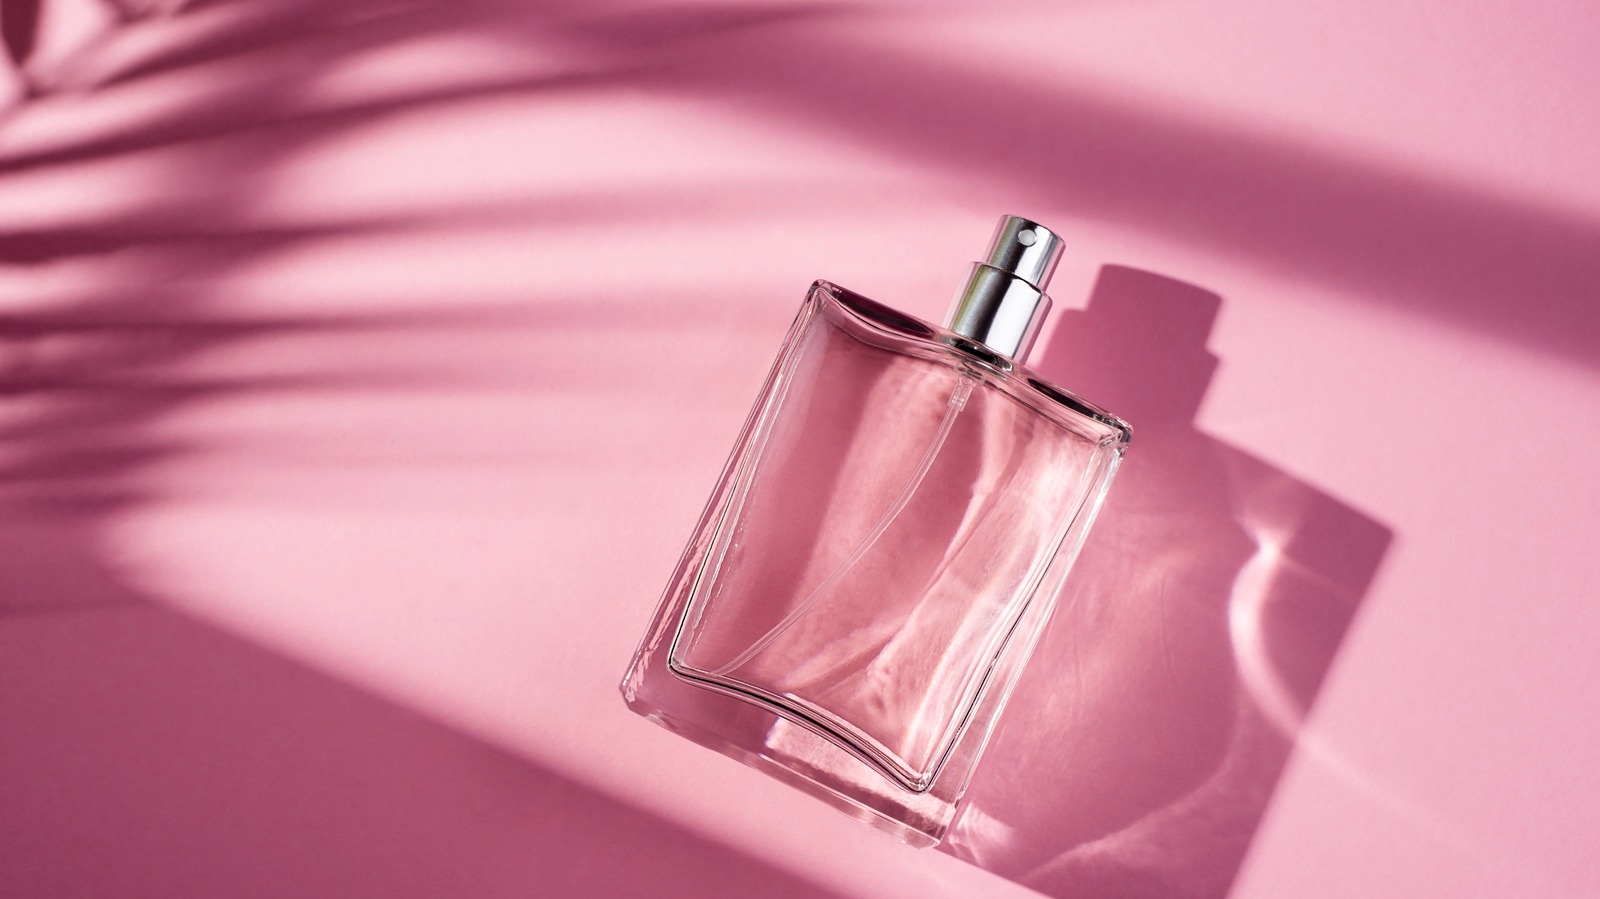 The New Fragrance Launch That Has A Familiar Scent You’ll Either Love Or Loathe